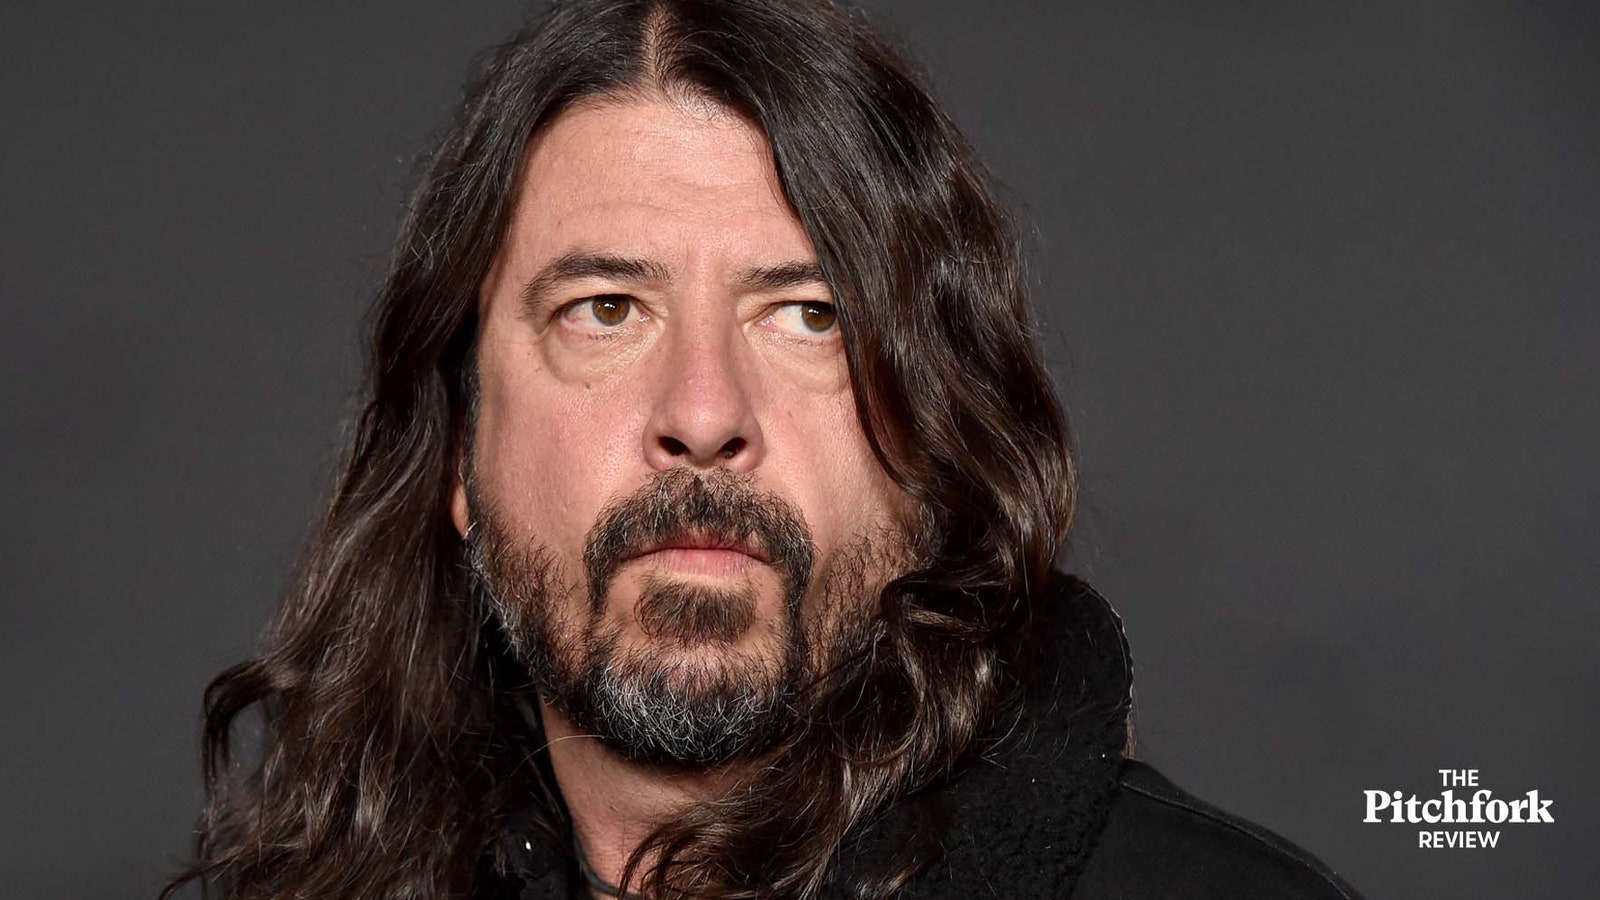 Foo Fighters Rock Through the Pain Once Again